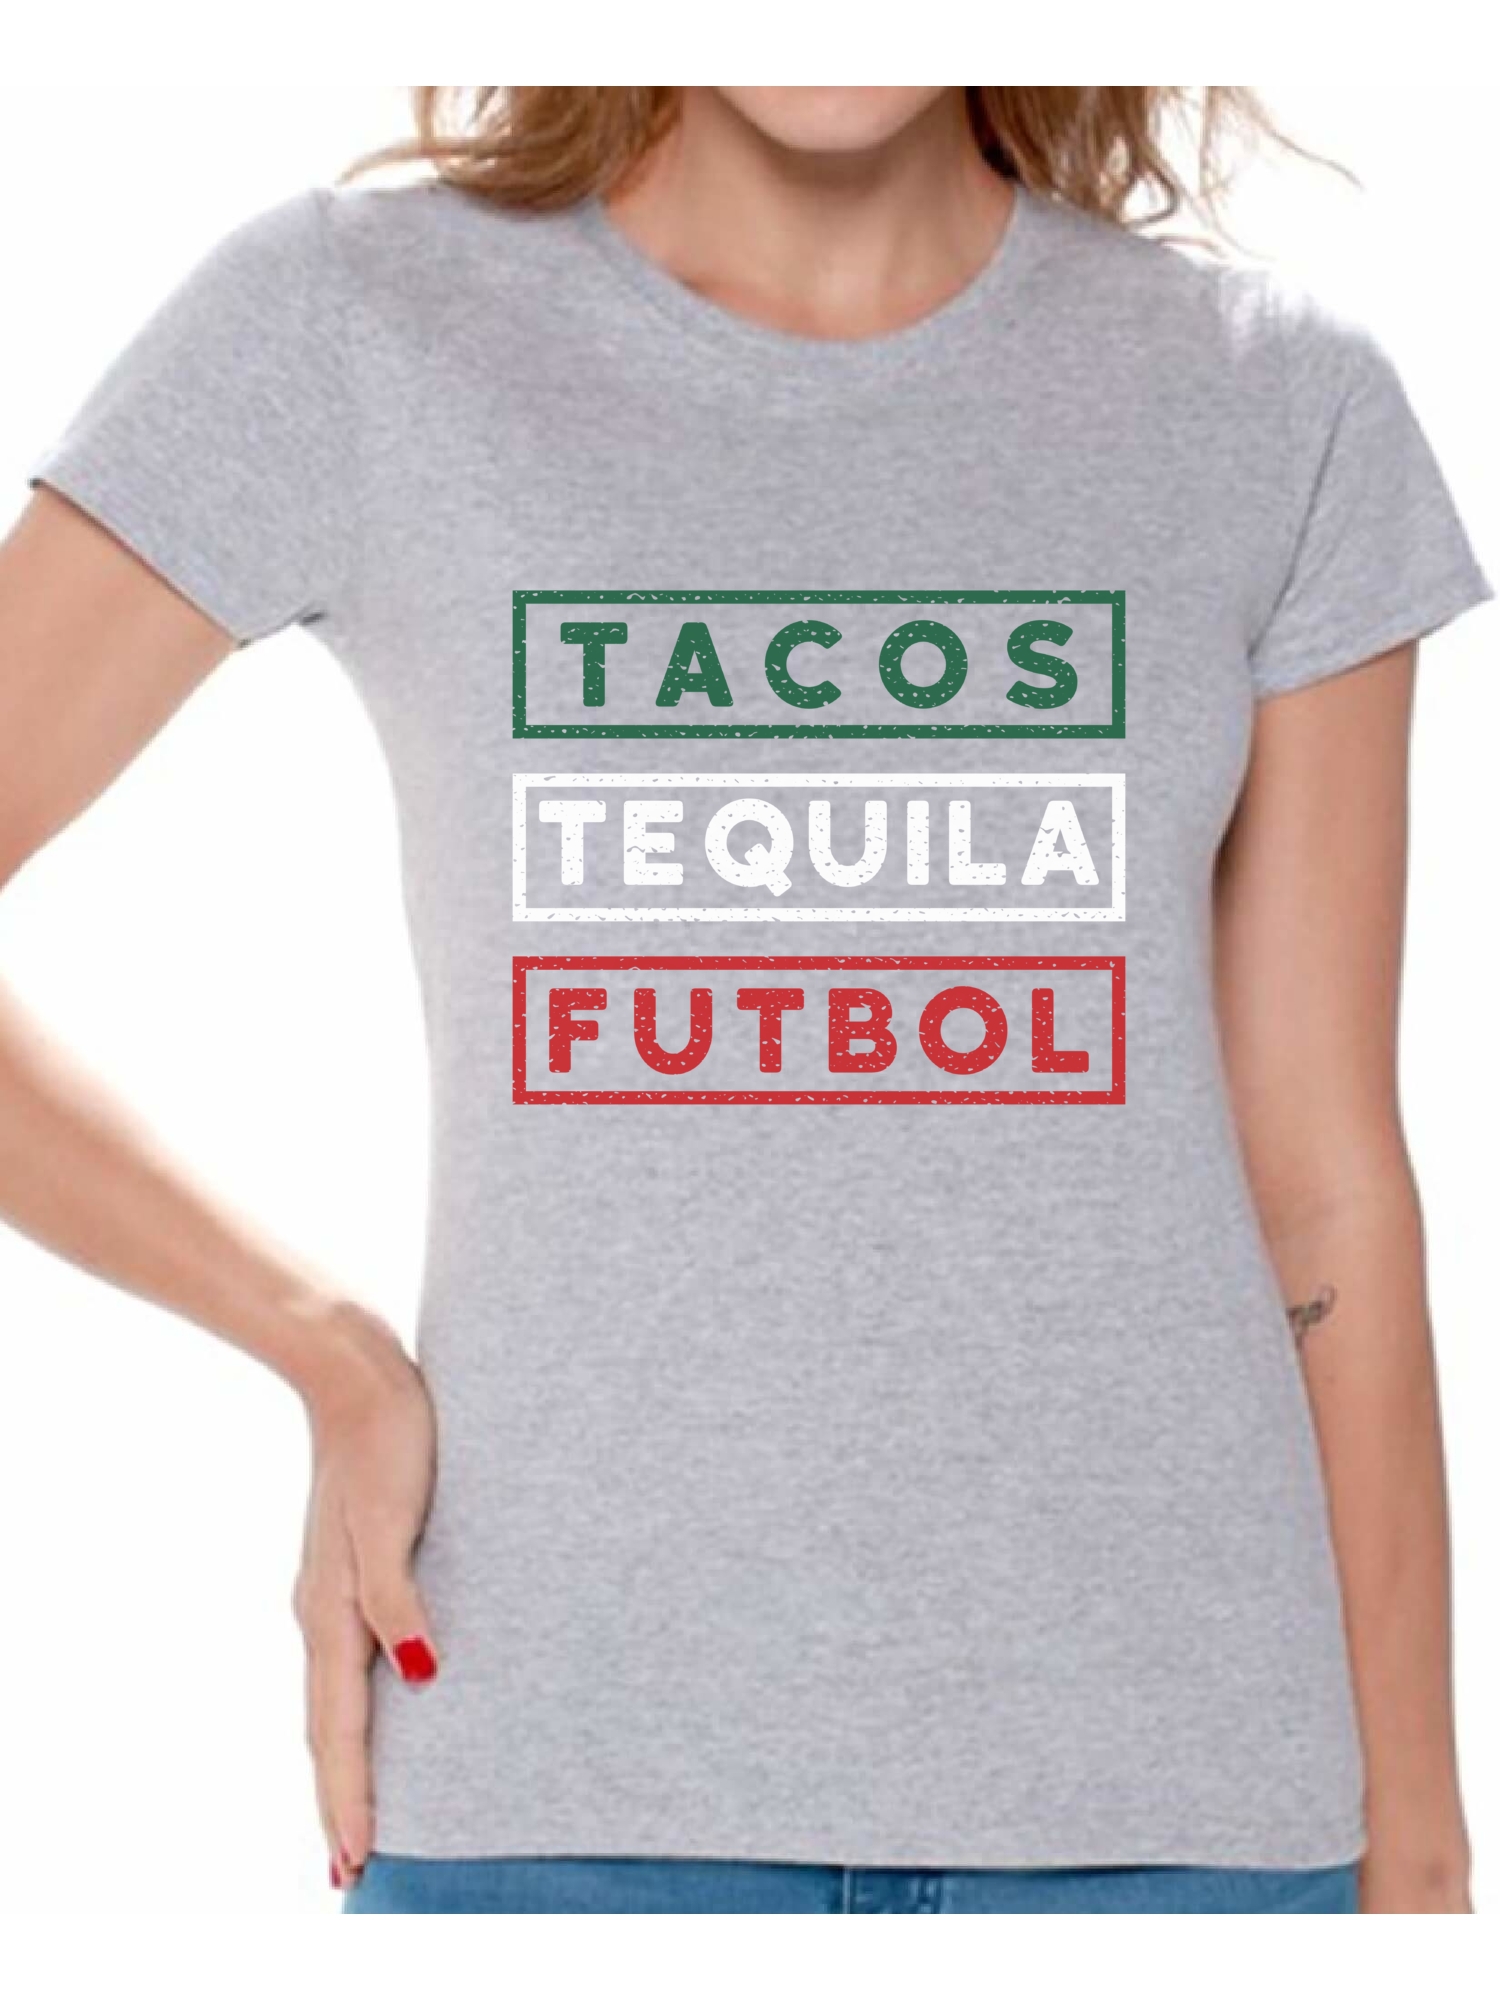 Awkward Styles Tacos Tequila Futbol Shirt for Women Mexico Shirt Tacos and Tequila Futbol Fan T Shirts Womens Mexican Soccer Tee Shirt Tacos & Tequila Tshirt Mexican Shirts Taco Tuesday Gifts for Her - image 1 of 4